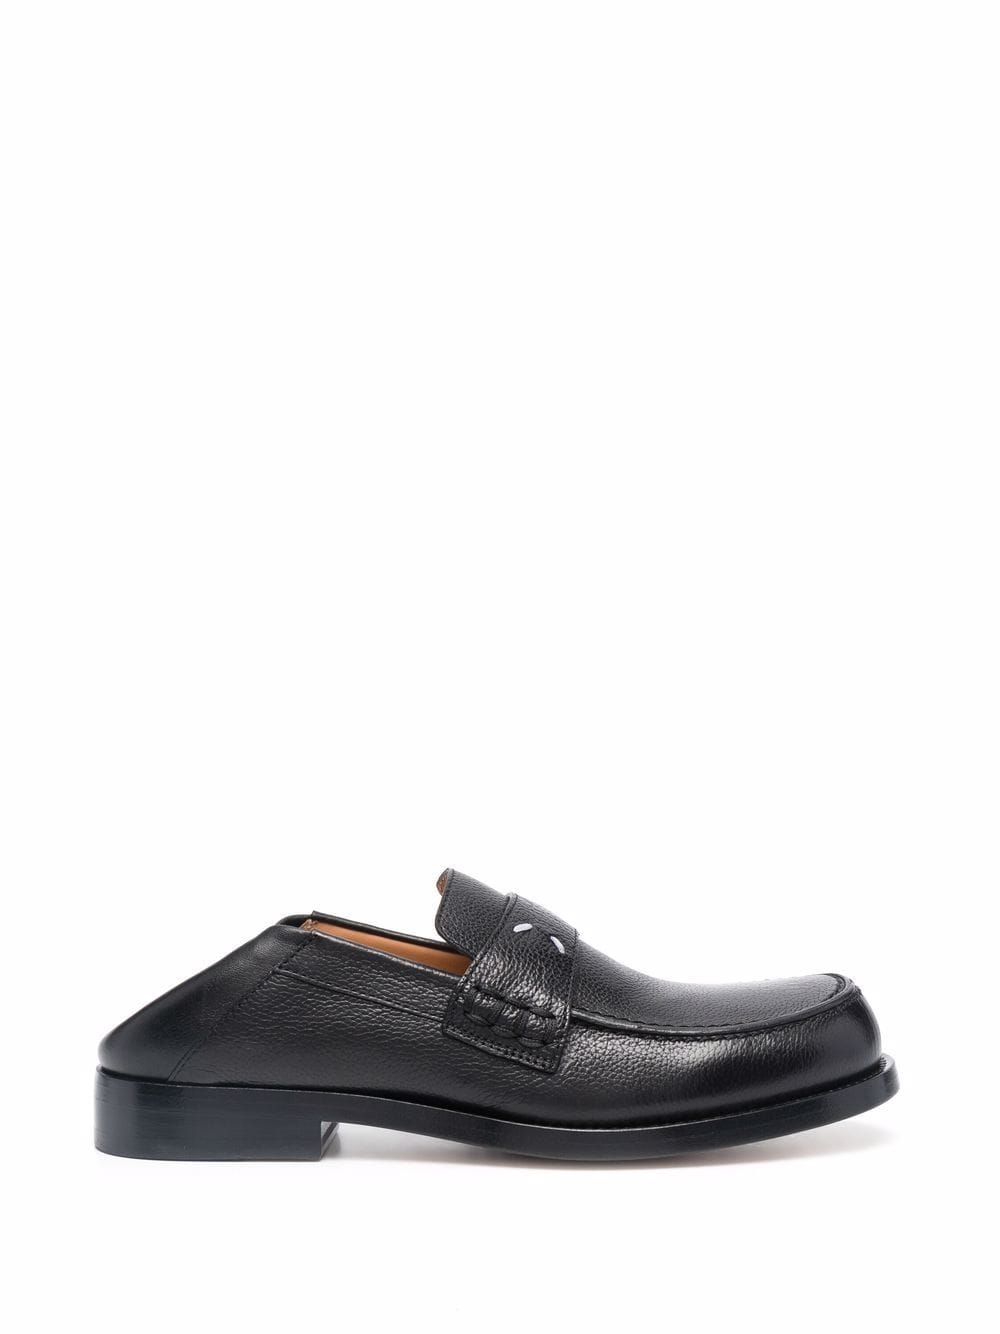 4-stitch leather loafers